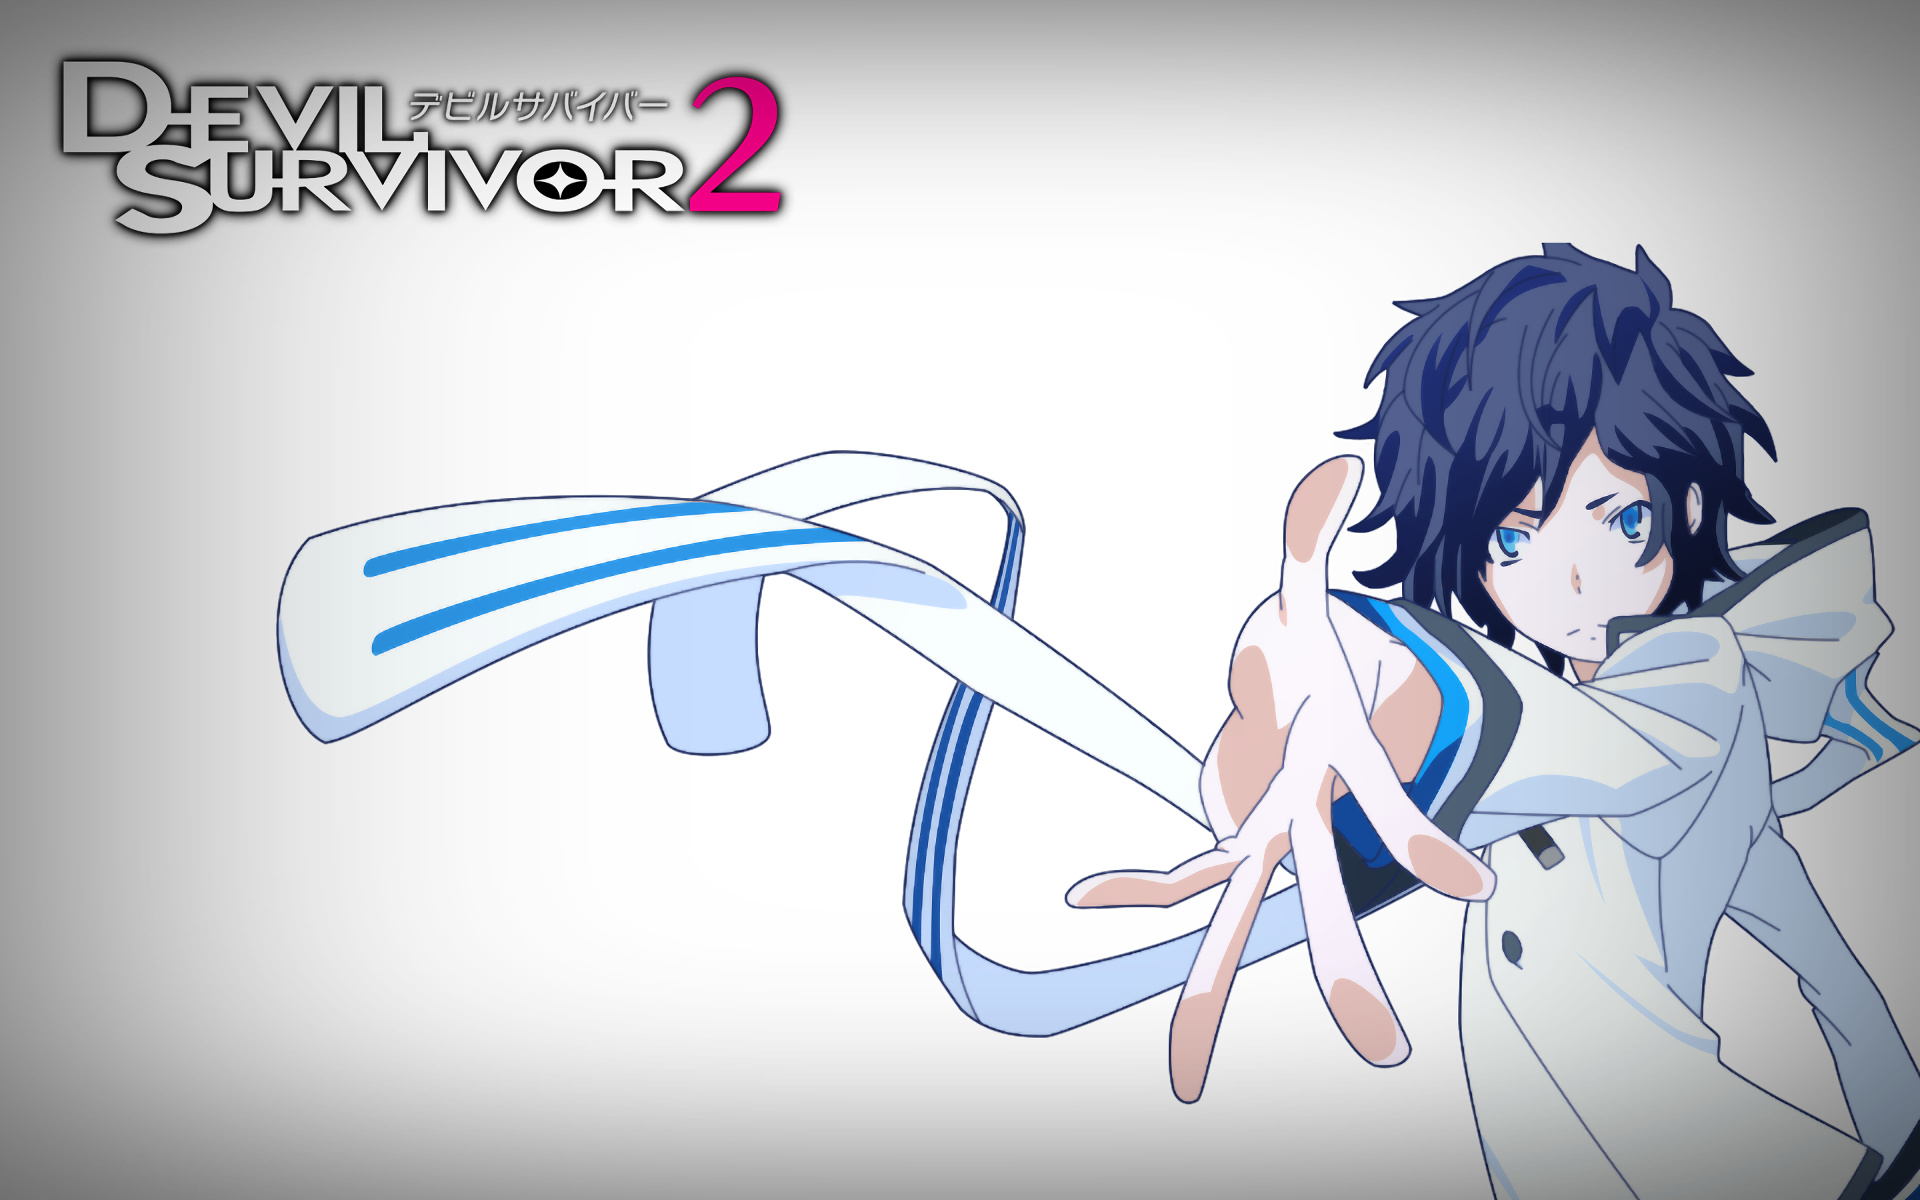 Devil Survivor 2: The Animation anime, Character wallpapers, Intense battles, Action-packed story, 1920x1200 HD Desktop